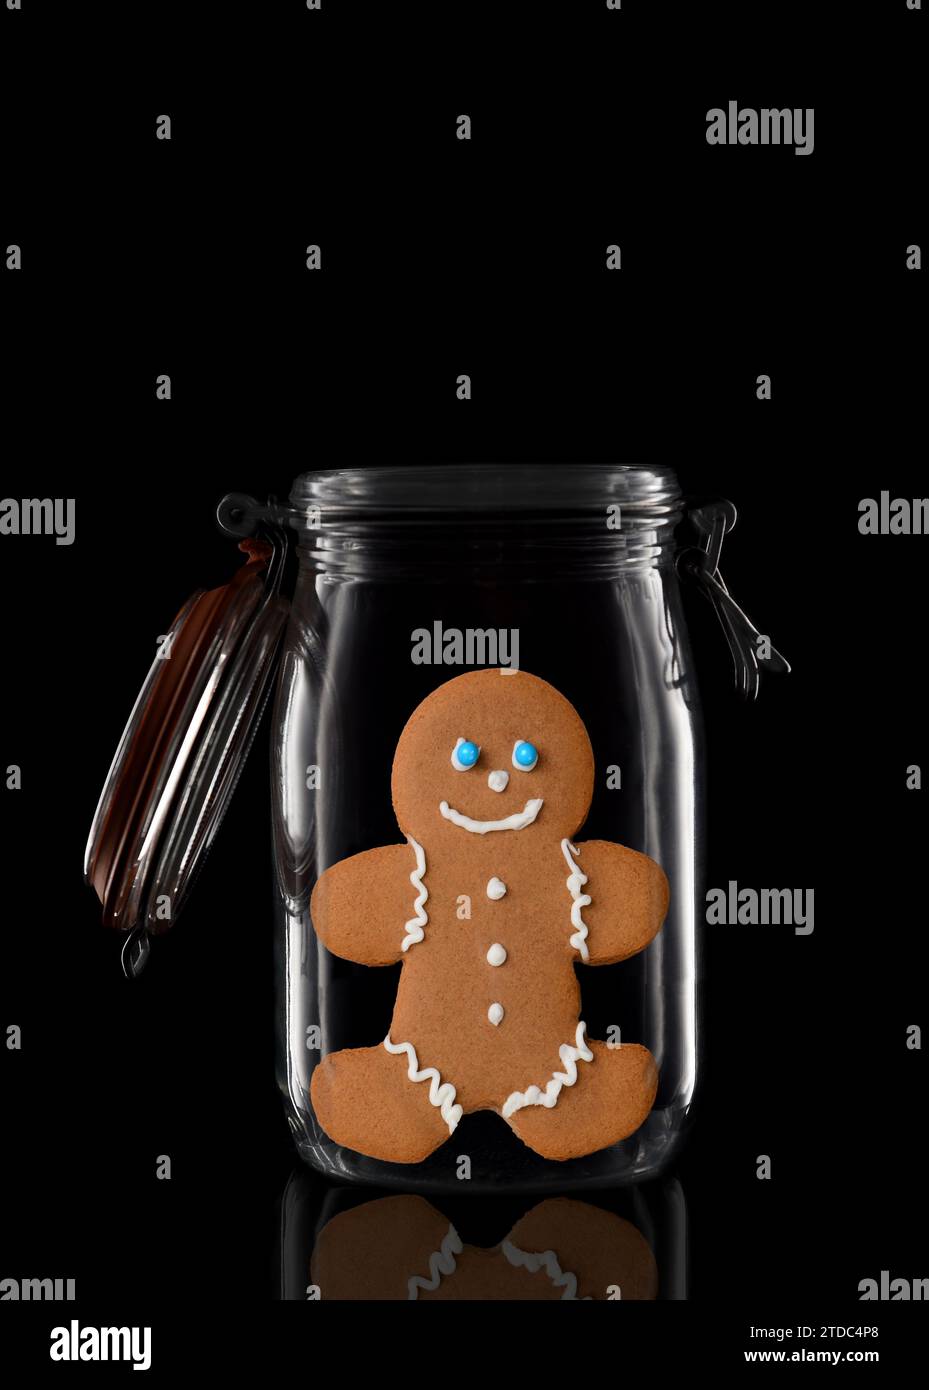 A glass storage or canning jar with a decorated Gingerbread Man cookie isolated on black with reflection, with lid open. Stock Photo